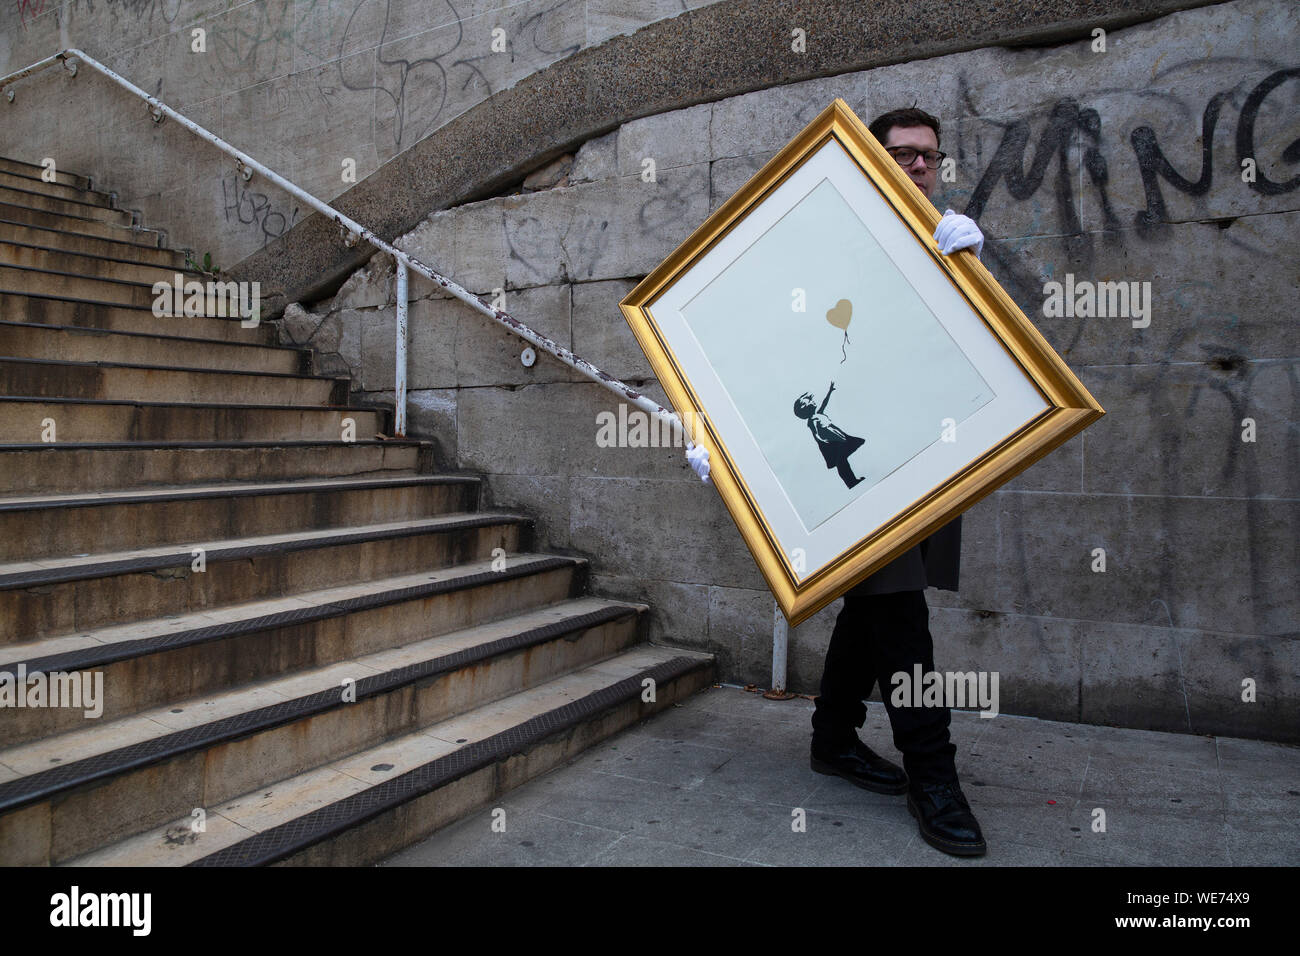 London, UK. 30th Aug, 2019. A Christie's employee poses with artworks 'Girl with balloon - Colour AP (Gold)' by anonymous street artist Banksy at the Southbank Centre in London Friday, August 30, 2019. The Southbank Centre was near one of the original locations the artwork appeared in London. The screen prints will be on sale during an online only auction titled 'Banksy : I can't believe you morons buy this sh*t' presented by Christie's auction house between 11-24 September 2019. Photograph Credit: Luke MacGregor/Alamy Live News Stock Photo